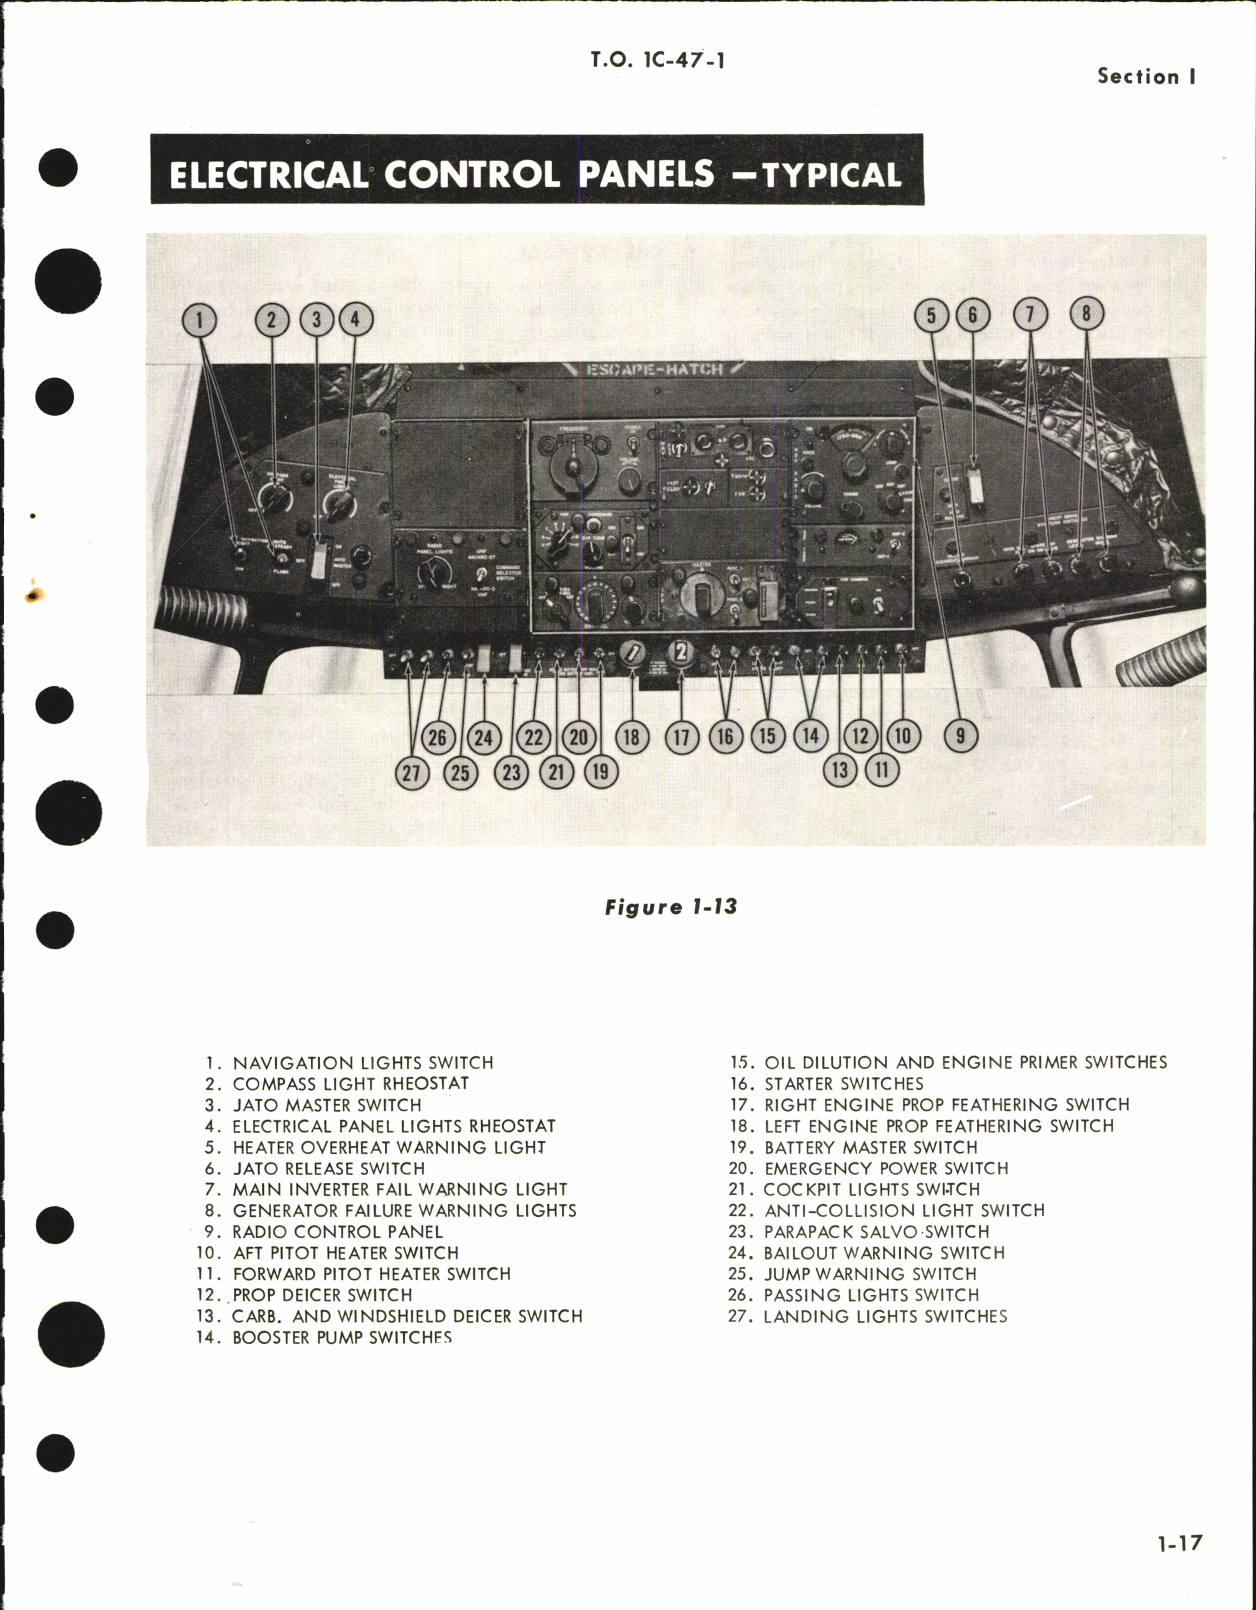 Sample page 5 from AirCorps Library document: Flight Manual for C-47, A, B, D, H, J, HC-47, C-117A, B, C, R4D-1, and TC-47K